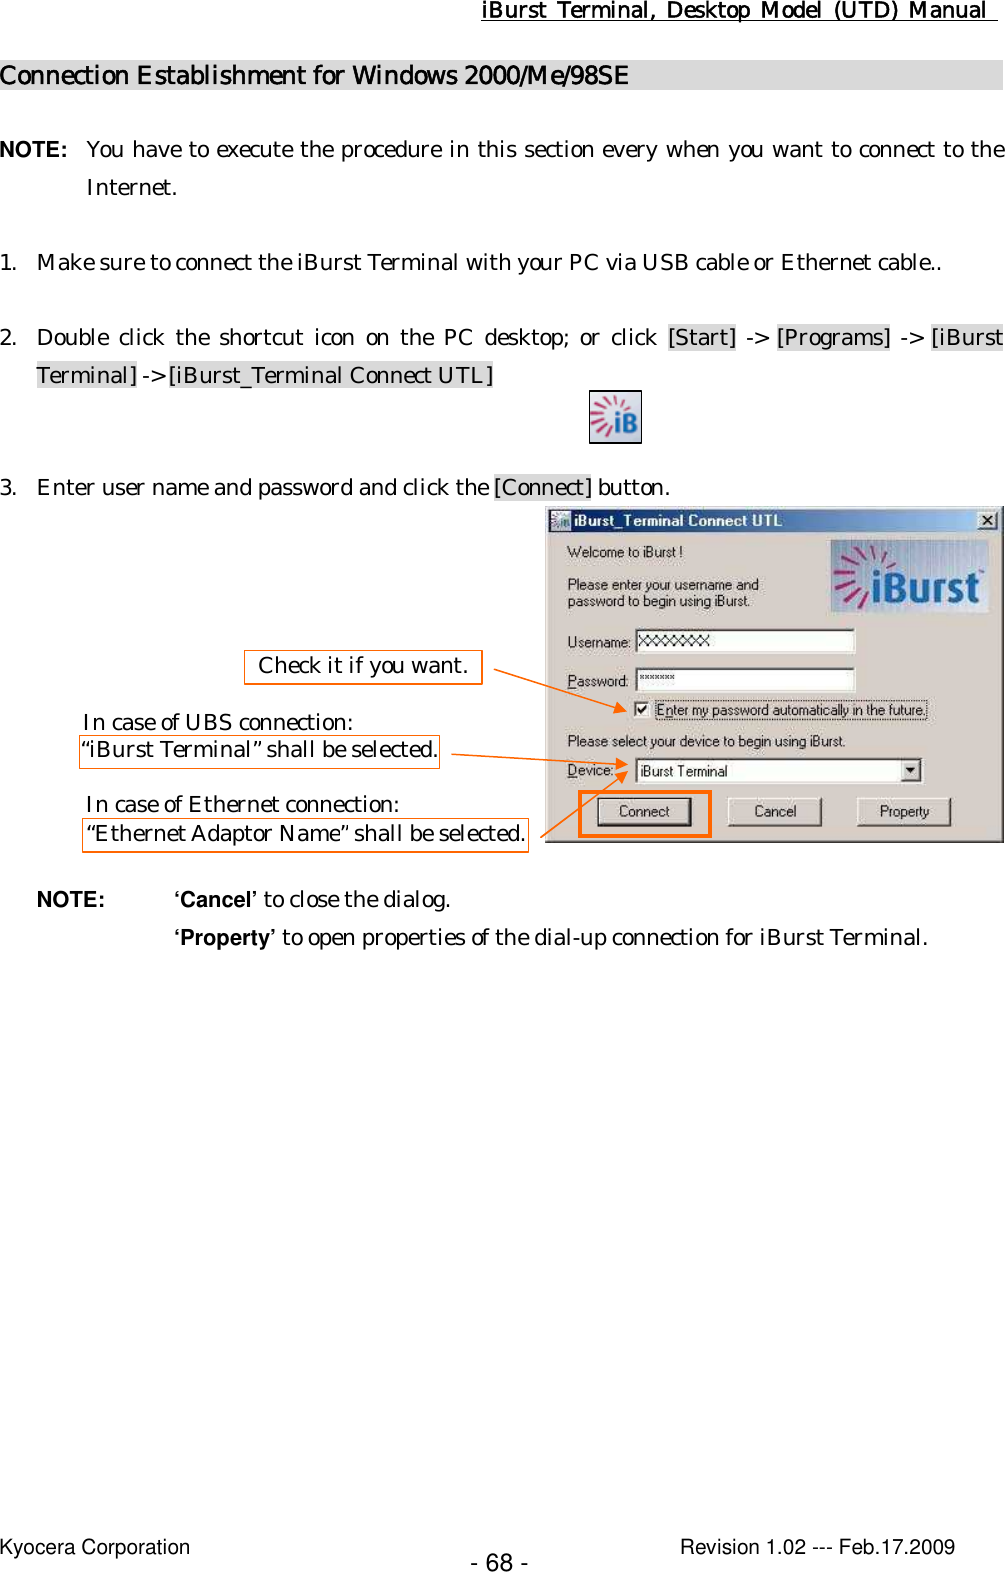 iBurst  Terminal, Desktop  Model  (UTD)  Manual    Kyocera Corporation                                                                                              Revision 1.02 --- Feb.17.2009 - 68 - Connection Establishment for Windows 2000/Me/98SE                                                      NOTE:  You have to execute the procedure in this section every when you want to connect to the Internet.  1. Make sure to connect the iBurst Terminal with your PC via USB cable or Ethernet cable..  2. Double click the shortcut icon on the PC desktop; or click [Start]  -&gt; [Programs] -&gt; [iBurst Terminal] -&gt; [iBurst_Terminal Connect UTL]   3. Enter user name and password and click the [Connect] button.    NOTE:  ‘Cancel’ to close the dialog. ‘Property’ to open properties of the dial-up connection for iBurst Terminal.  “iBurst Terminal” shall be selected. Check it if you want. In case of UBS connection: “Ethernet Adaptor Name” shall be selected. In case of Ethernet connection: 